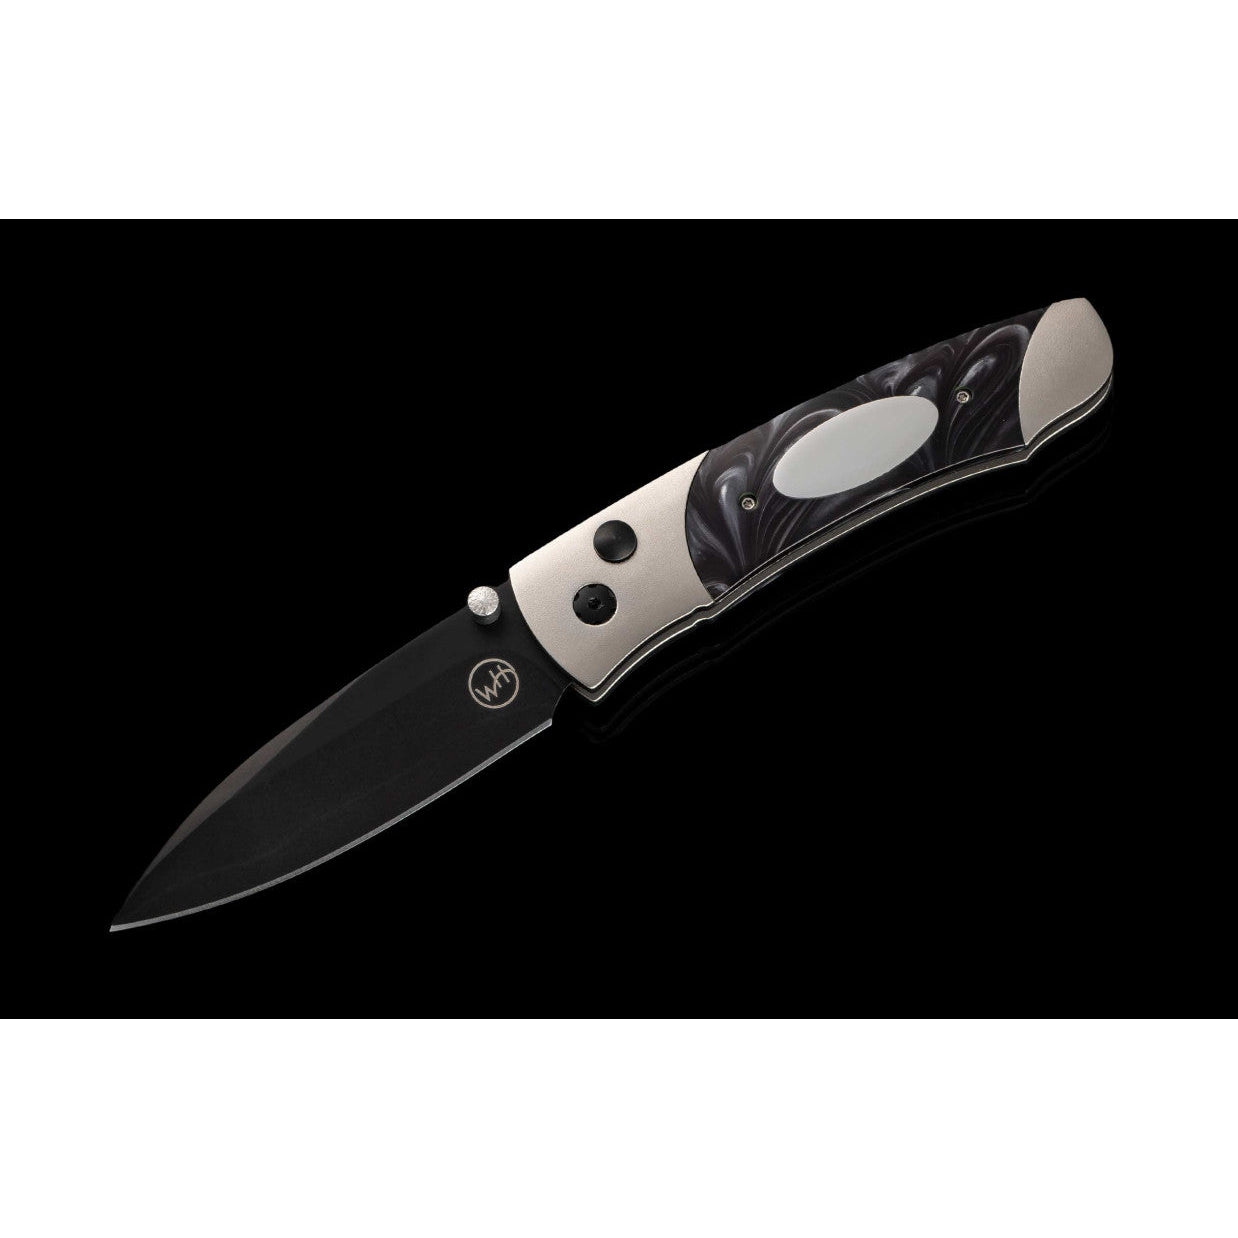 William Henry A200-1B Knife-Knives & Tools-Kevin's Fine Outdoor Gear & Apparel